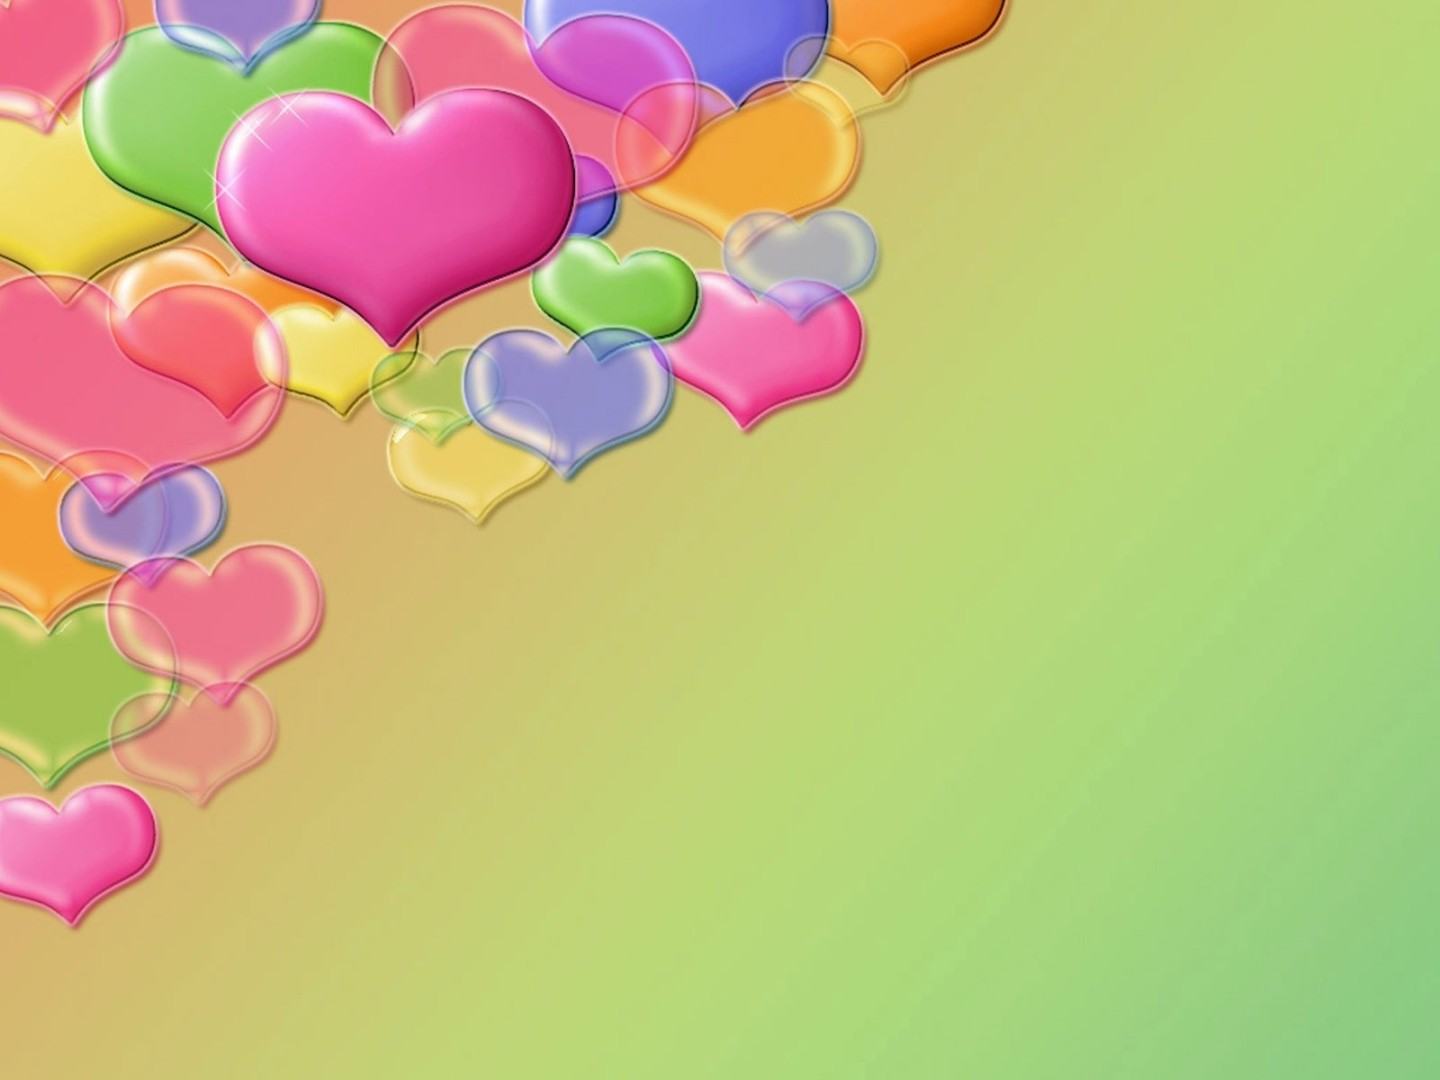 Is Under The Valentines Day Wallpaper Category Of HD